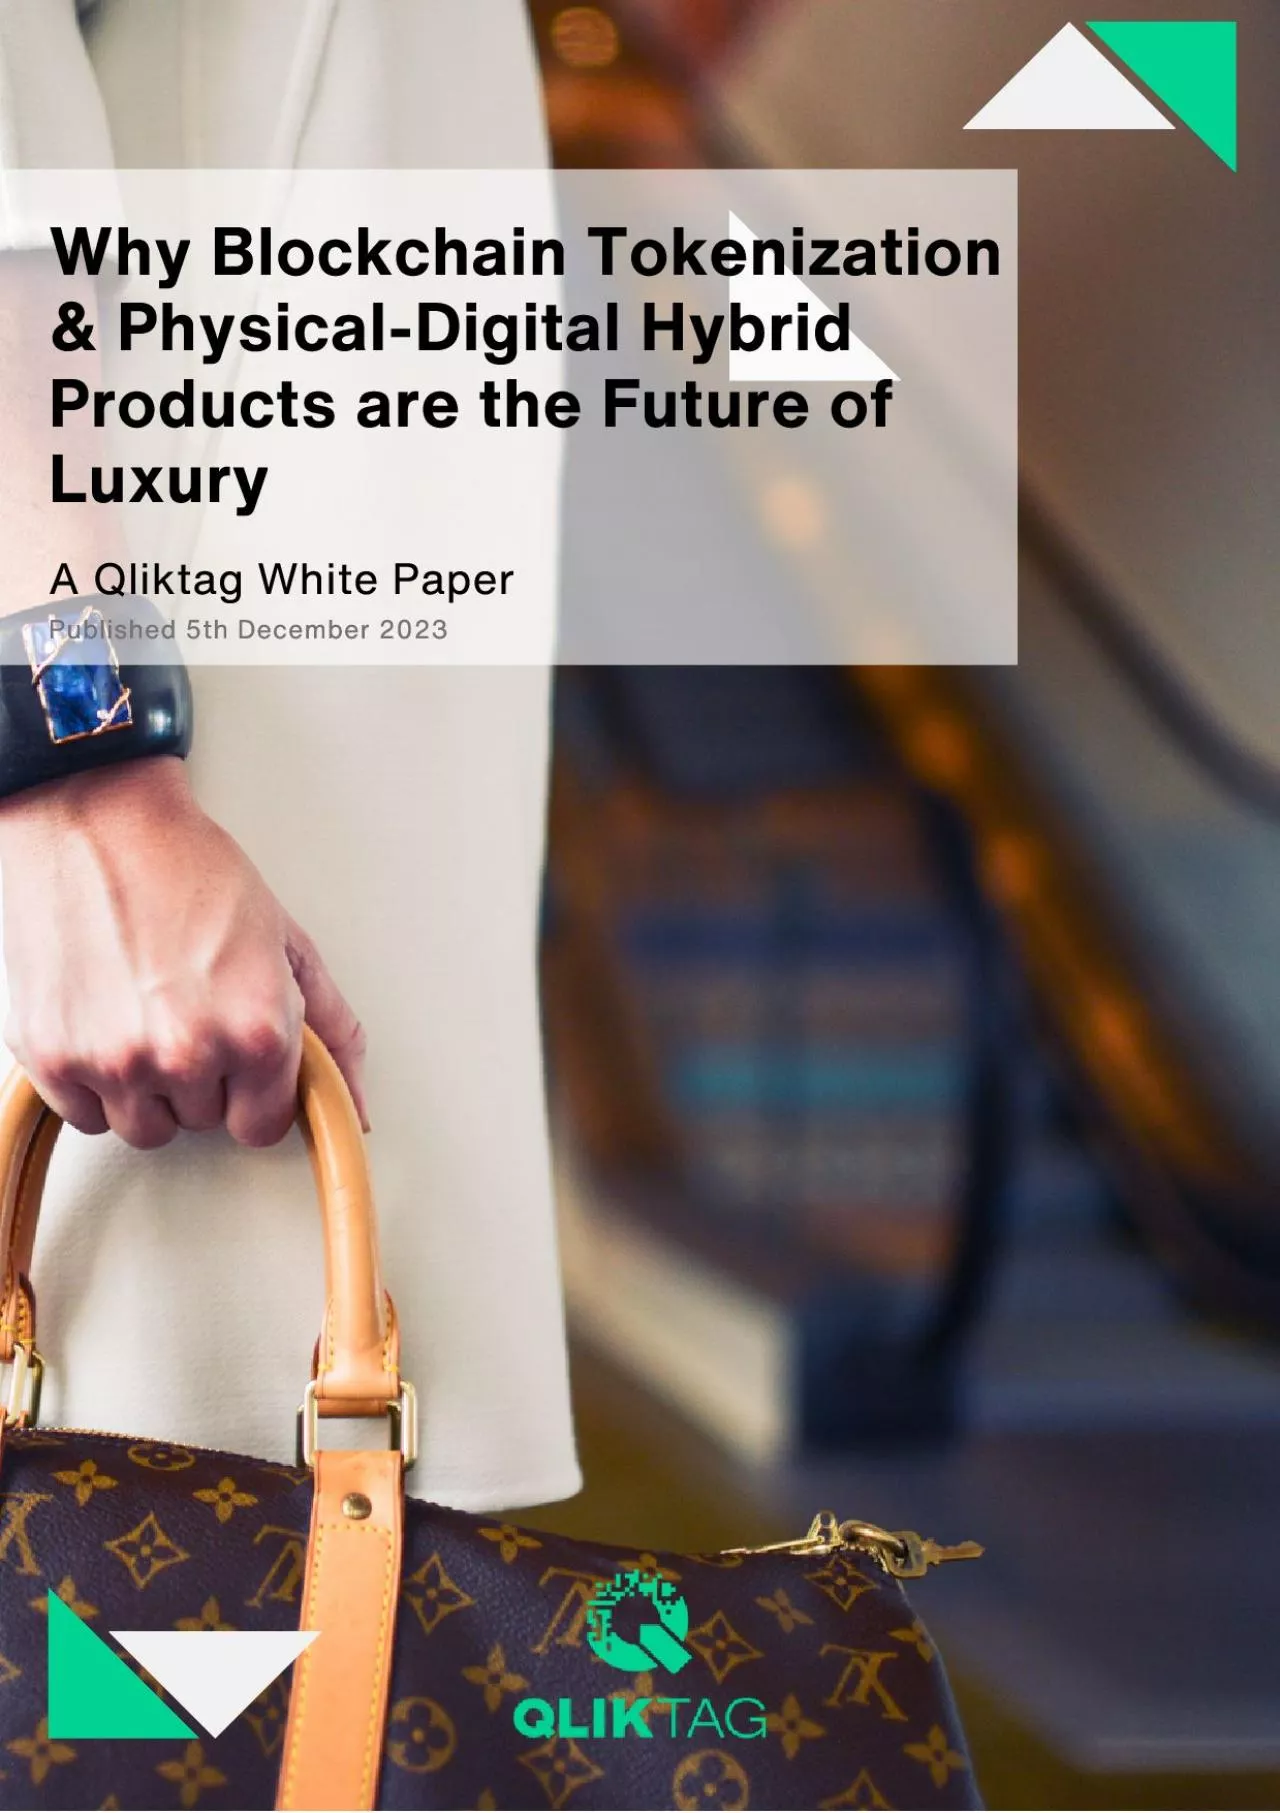 Why Blockchain Tokenization & Physical-Digital Hybrid Products are the Future of Luxury